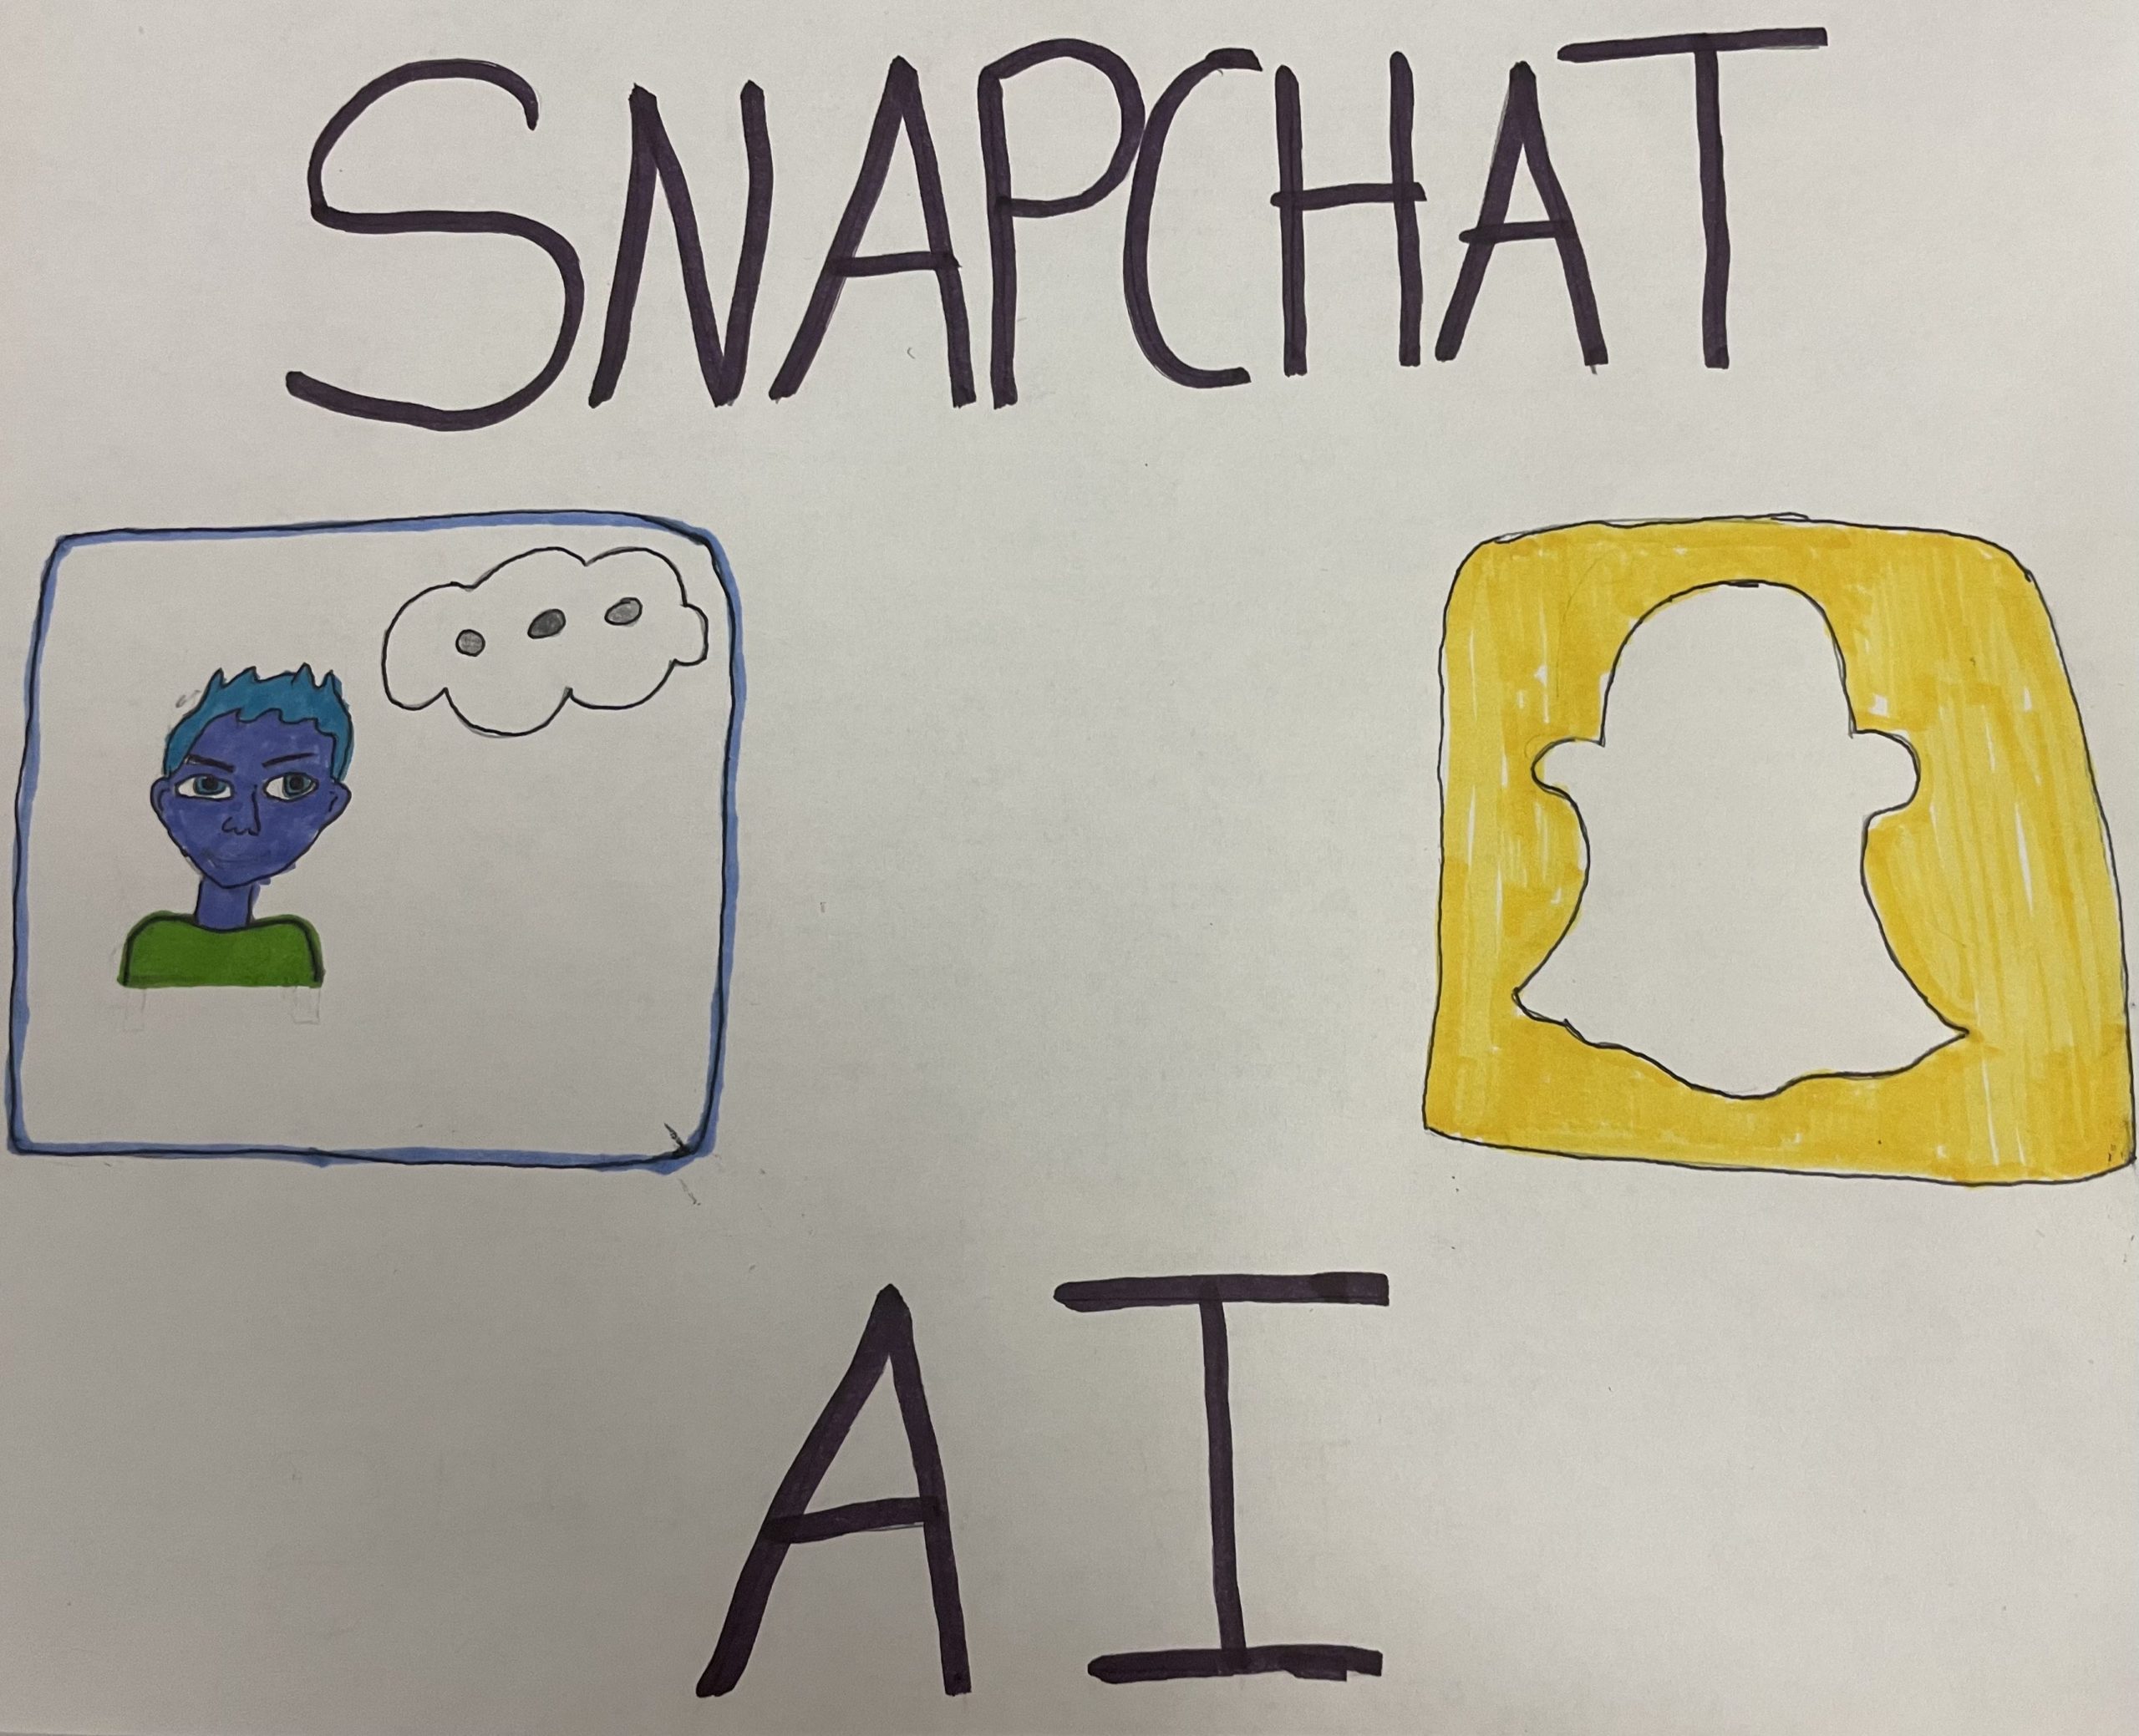 A drawing depicting the Snapchat logo as well as a My AI Bitmoji.